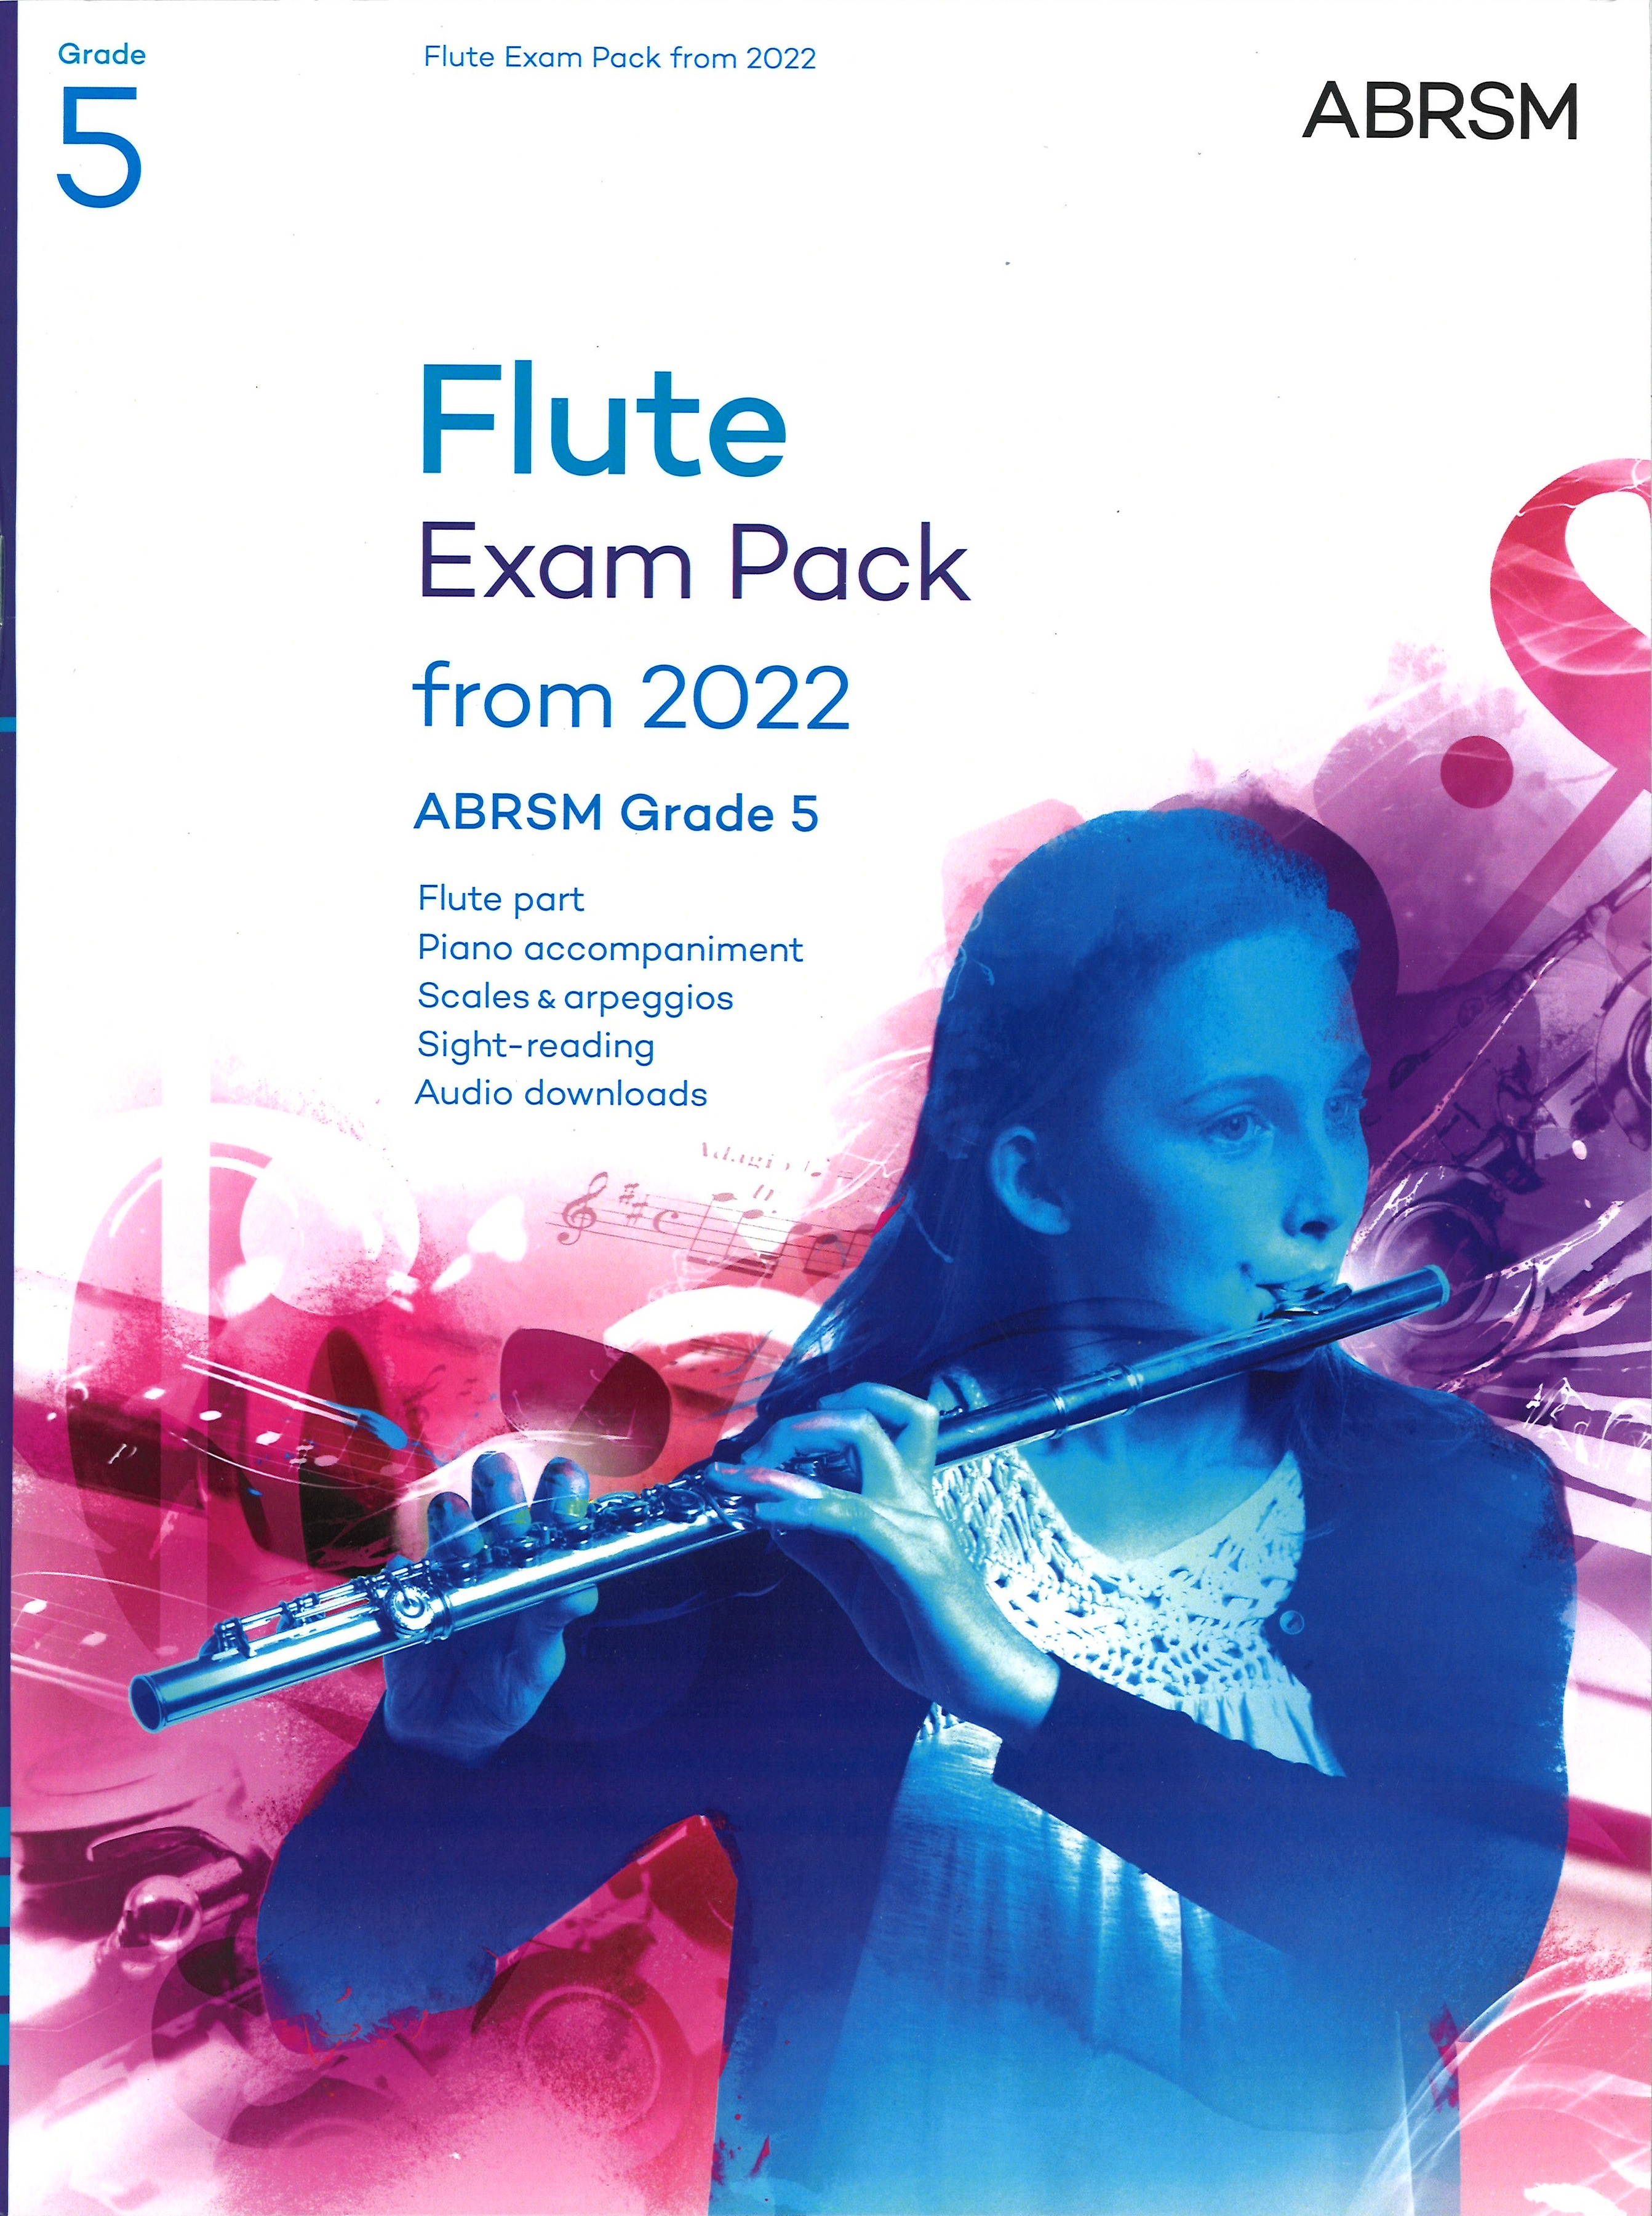 Flute Exam Pack From 2022 Grade 5 Complete Abrsm Sheet Music Songbook